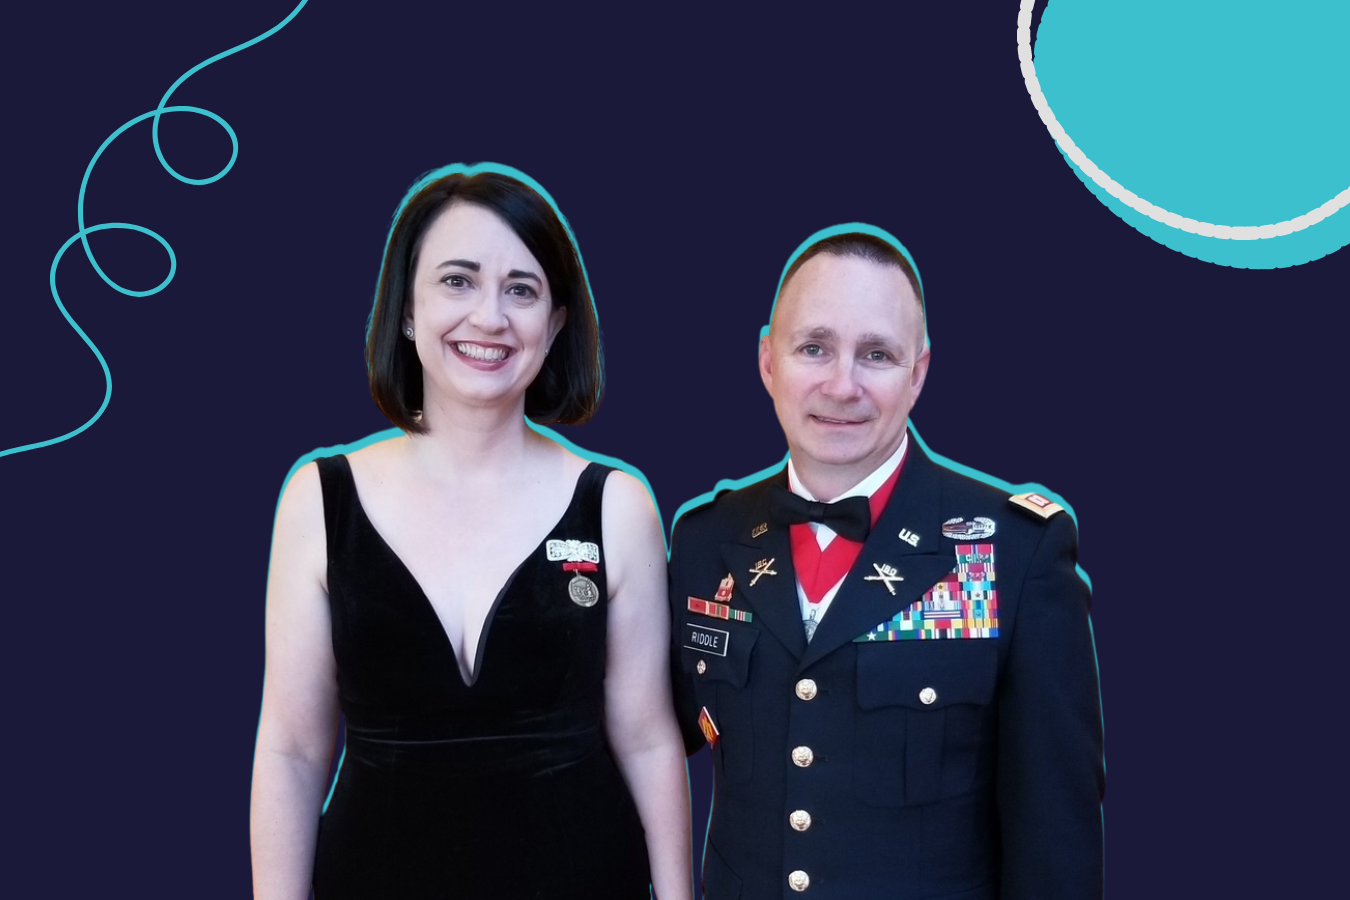 How flex work helps military spouse Jennifer Riddle balance career, family, and service